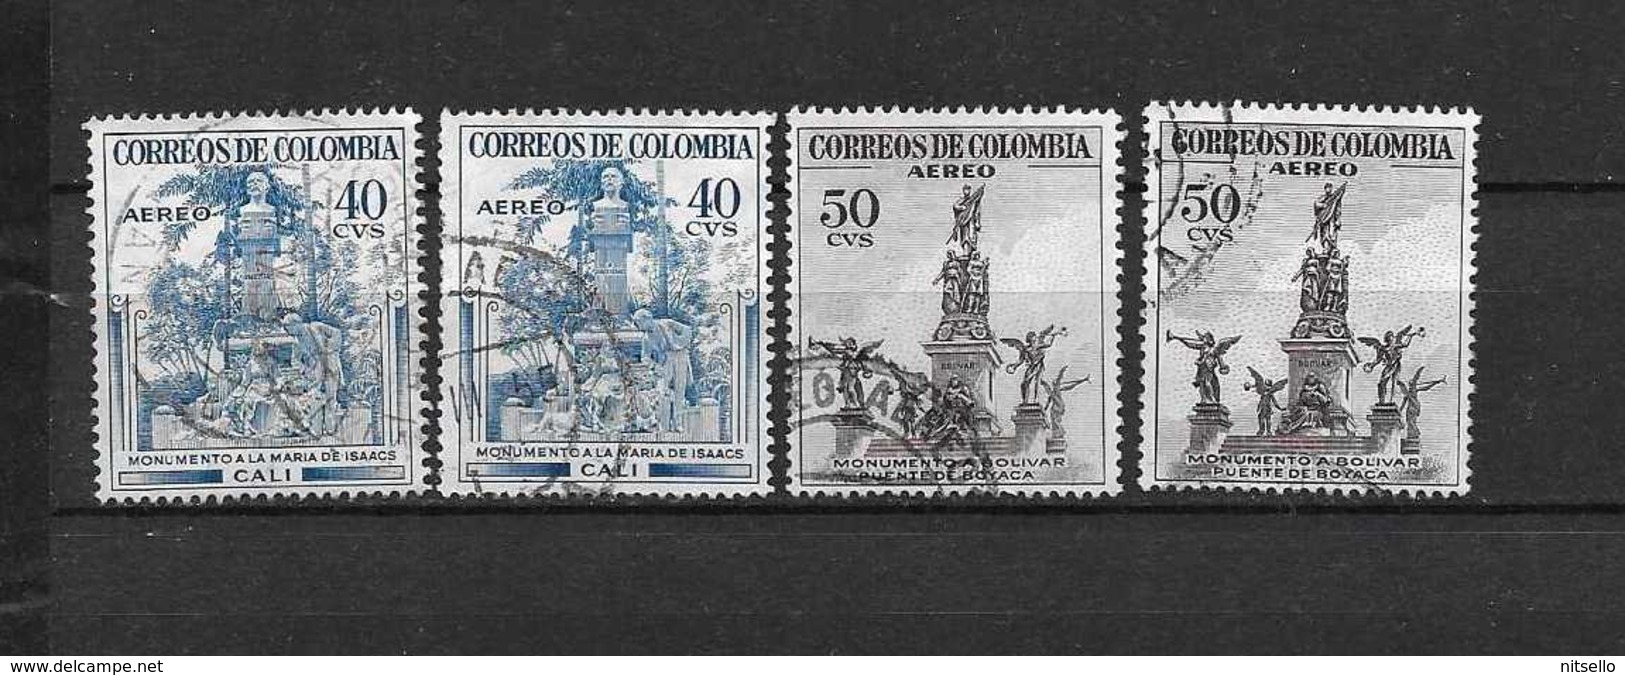 LOTE 2153  ///  COLOMBIA      ¡¡¡ LIQUIDATION !!! - Colombia